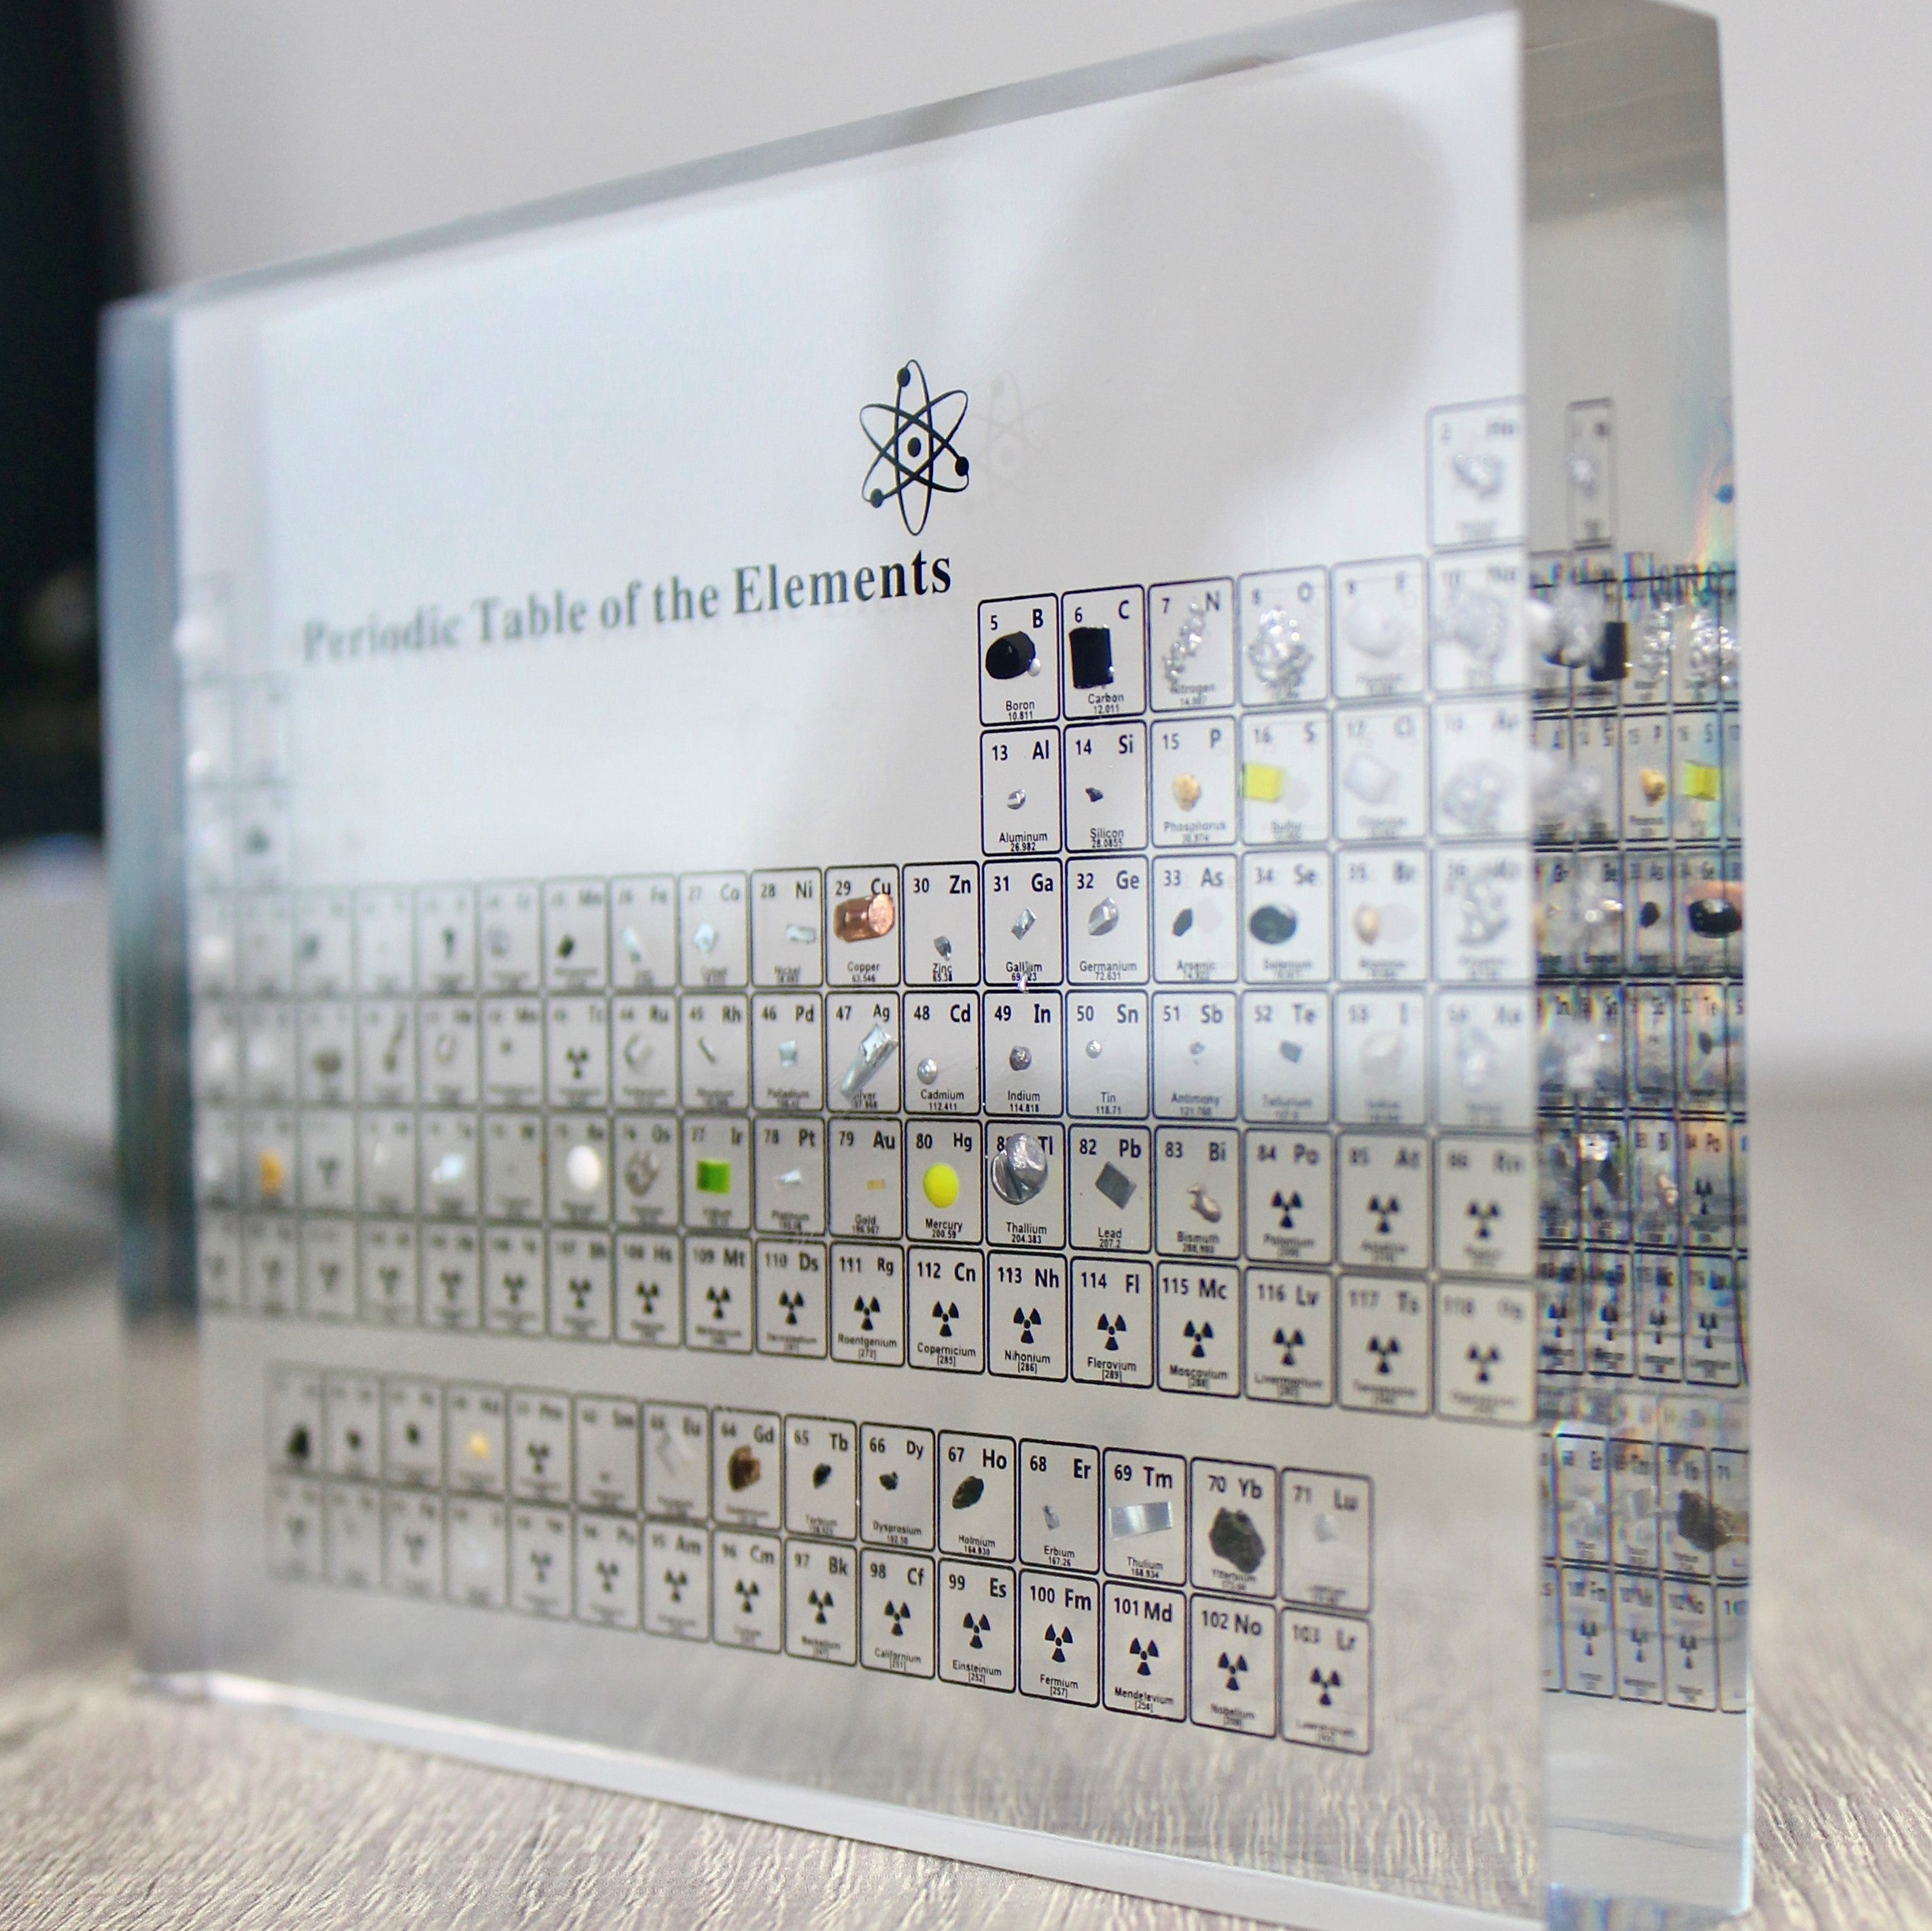 Periodic Table With Real Inside, Real Periodic Table, Tabla